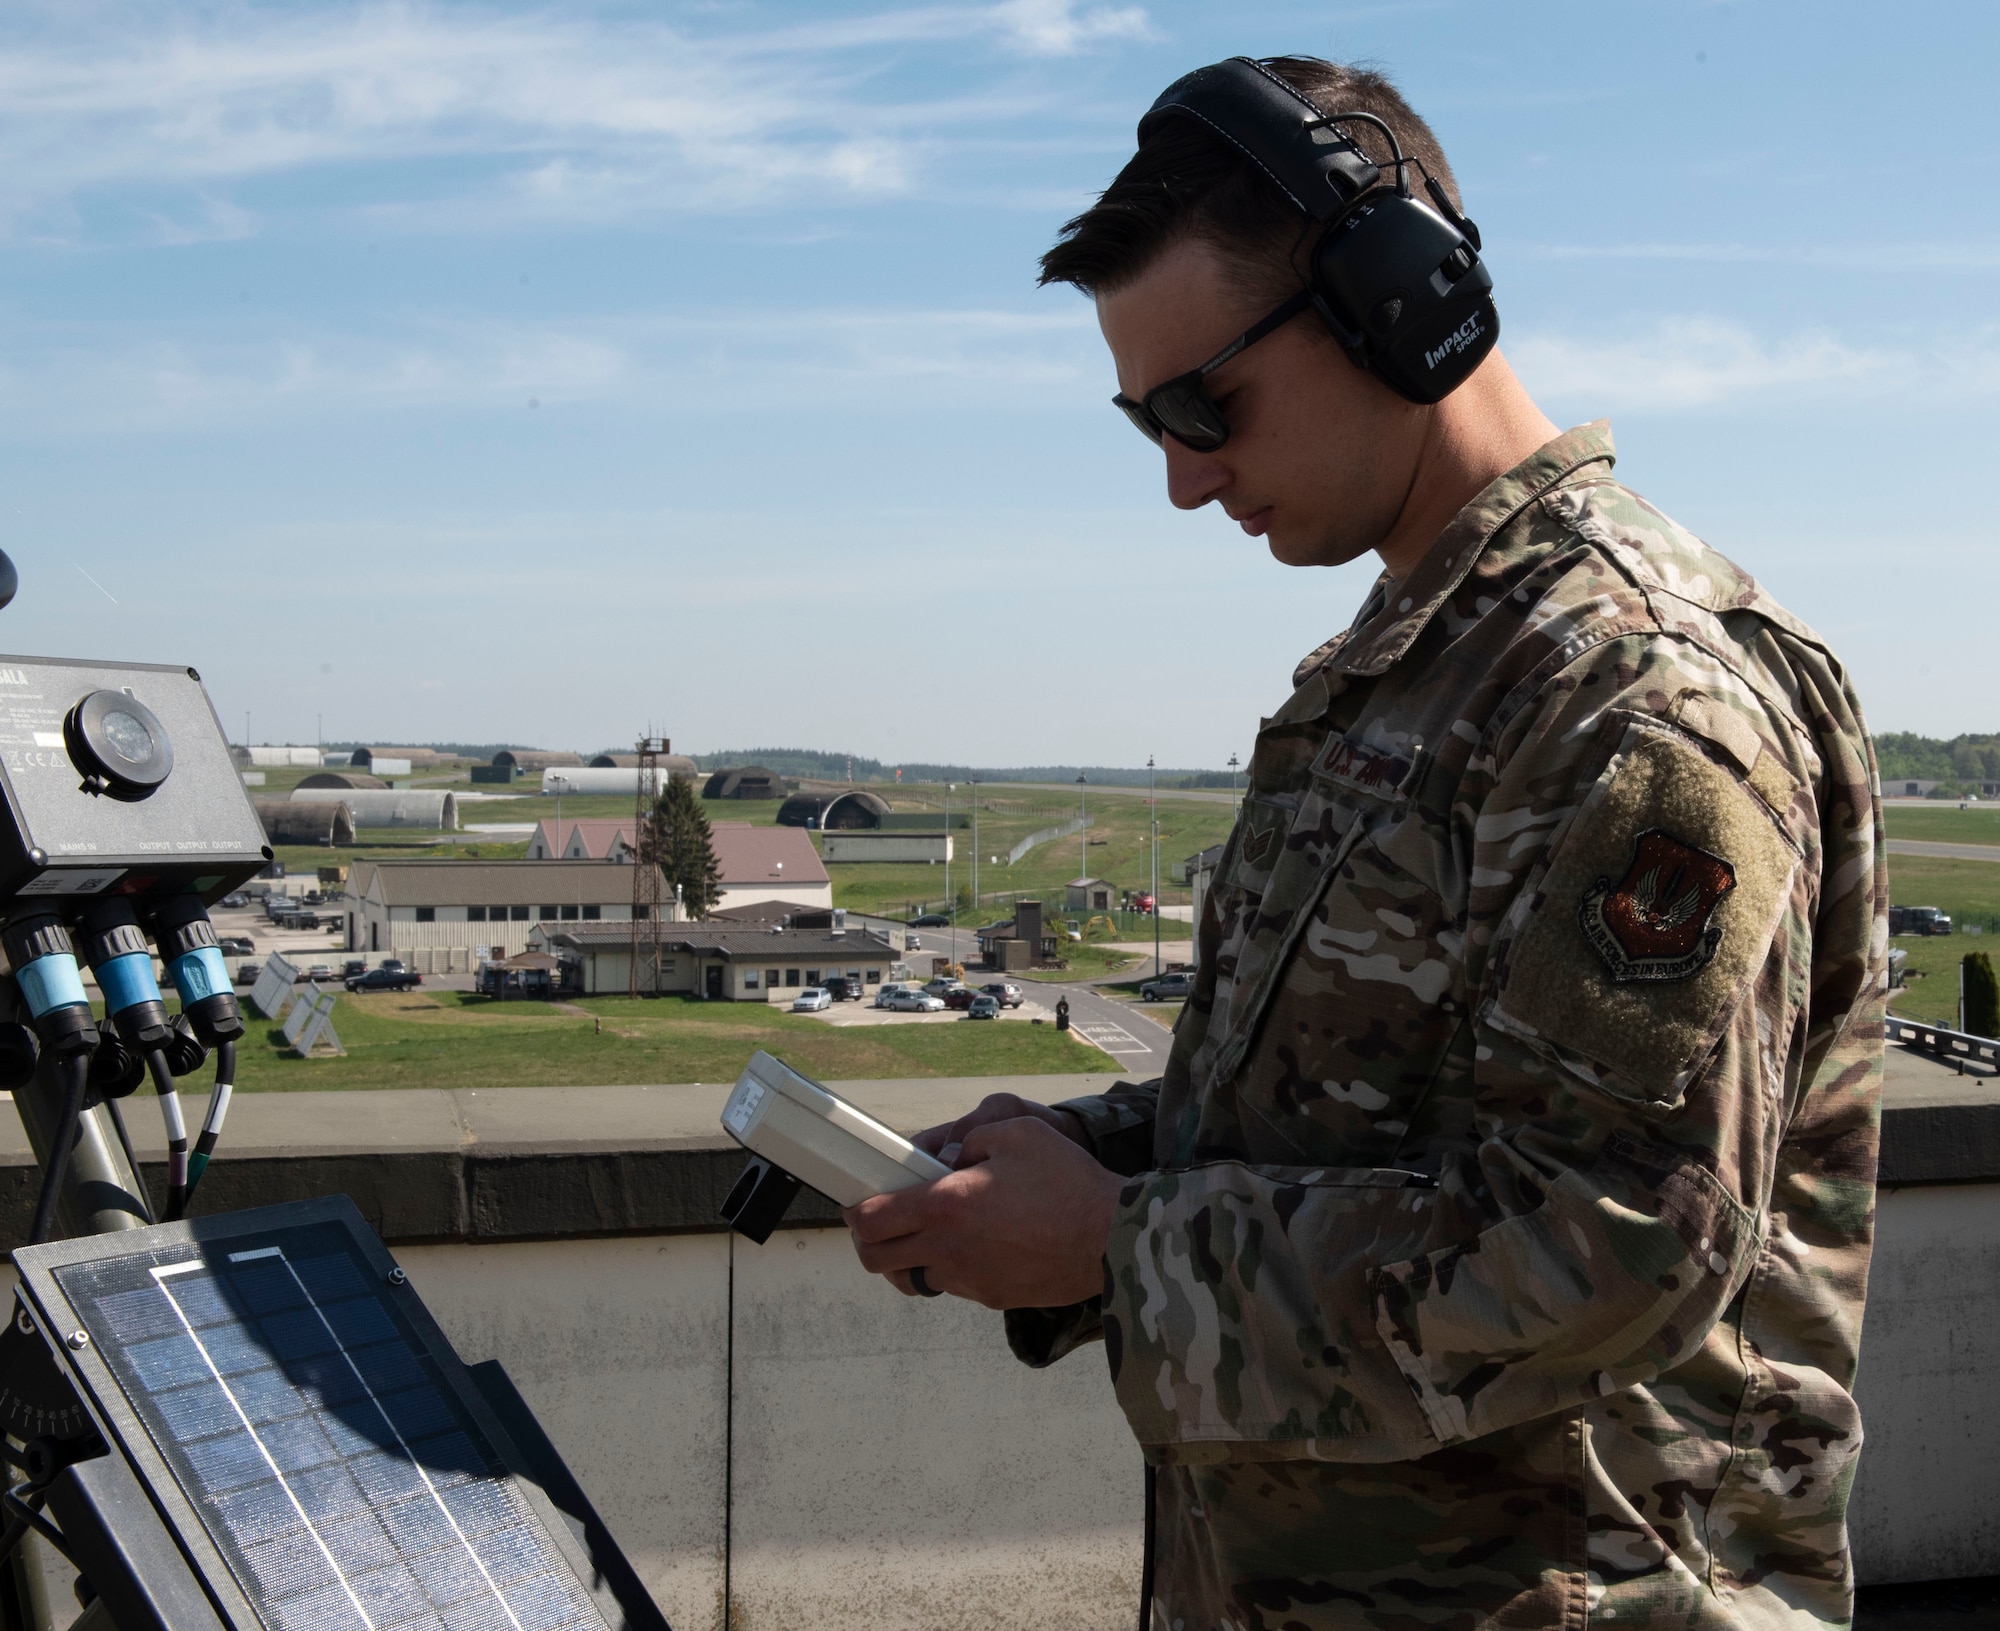 U.S. Air Force Staff Sgt. Kevin Perritt, 52nd OSS Weather Flight NCOIC of mission weather operations, uses a Tactical Meteorological Observation System (TMQ-53), at Spangdahlem Air Base, Germany, April 28, 2020. Perritt has been maintaining mission readiness during the COVID-19 pandemic by creating new products for the 480th Fighter Squadron in helping make their mission planning more seamless when prepping for weather limiting factors. (U.S. Air Force photo by Senior Airman Melody W. Howley)